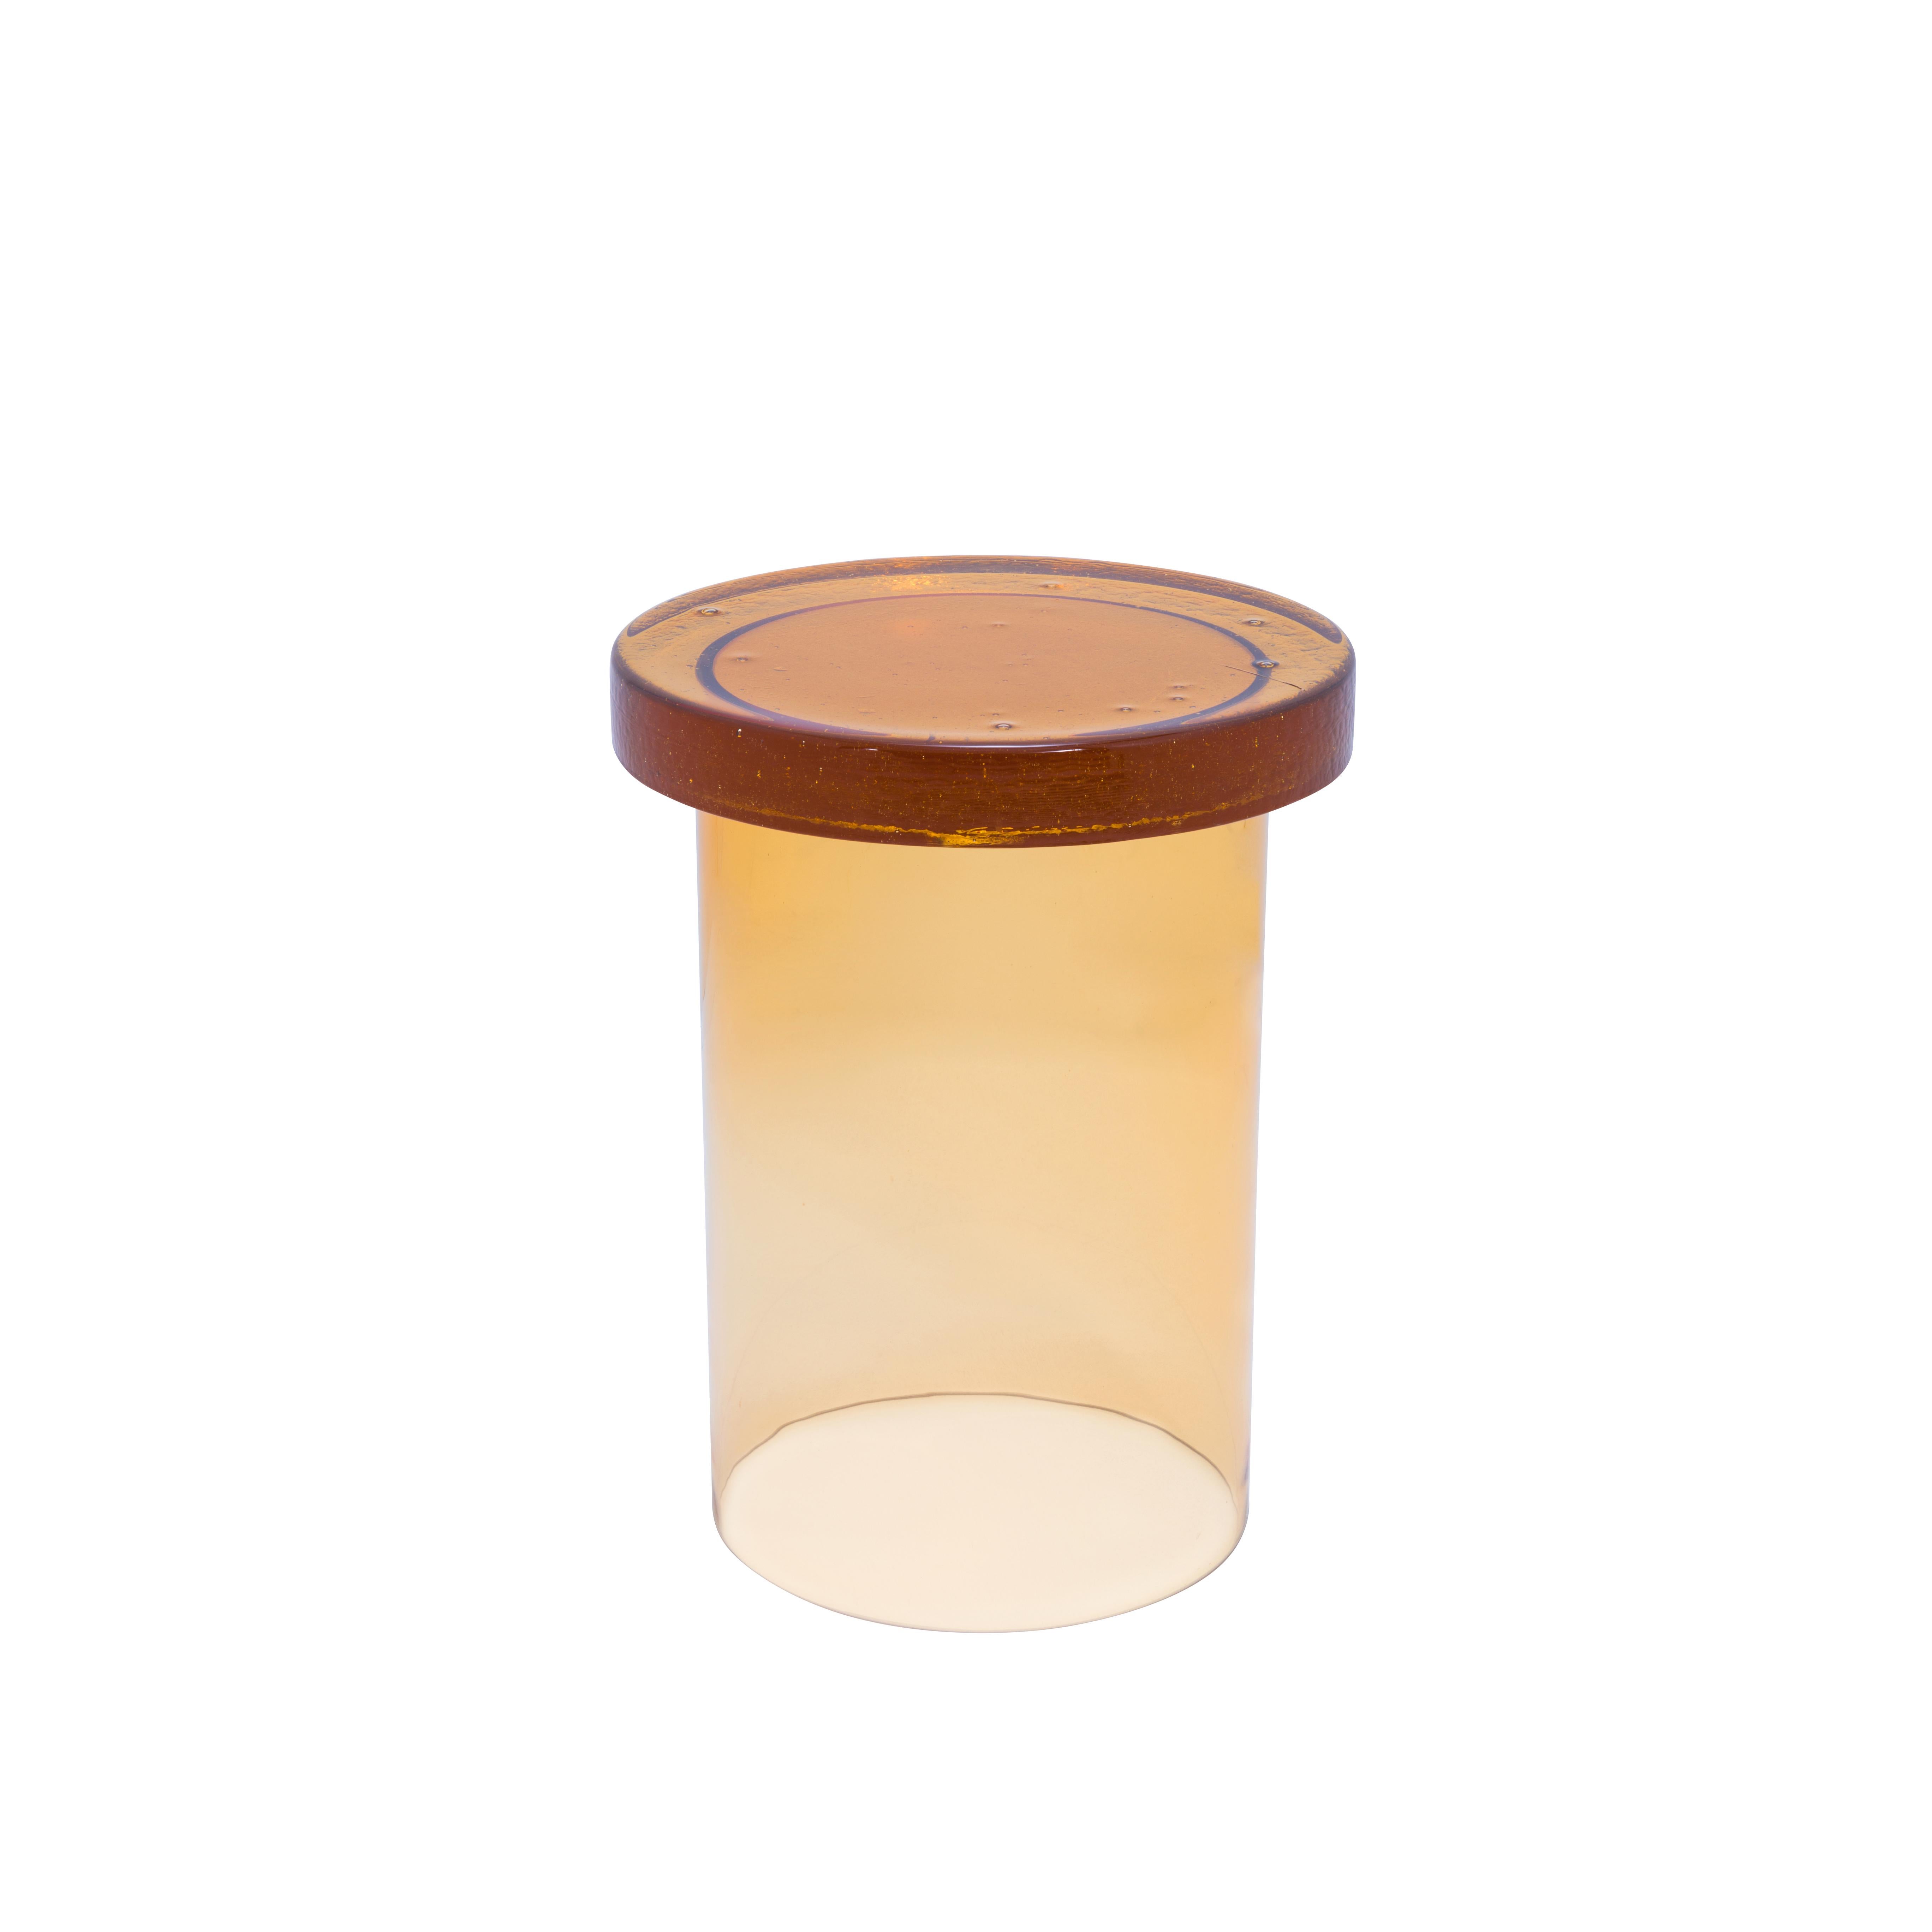 Alwa three amber side table by Pulpo
Dimensions: D 38 x H 44 cm
Materials: casted and handblown glass

Also available in different colours.

Normally, glass is regarded as being lightweight with sharp edges. In contrast, Sebastian Herkner’s